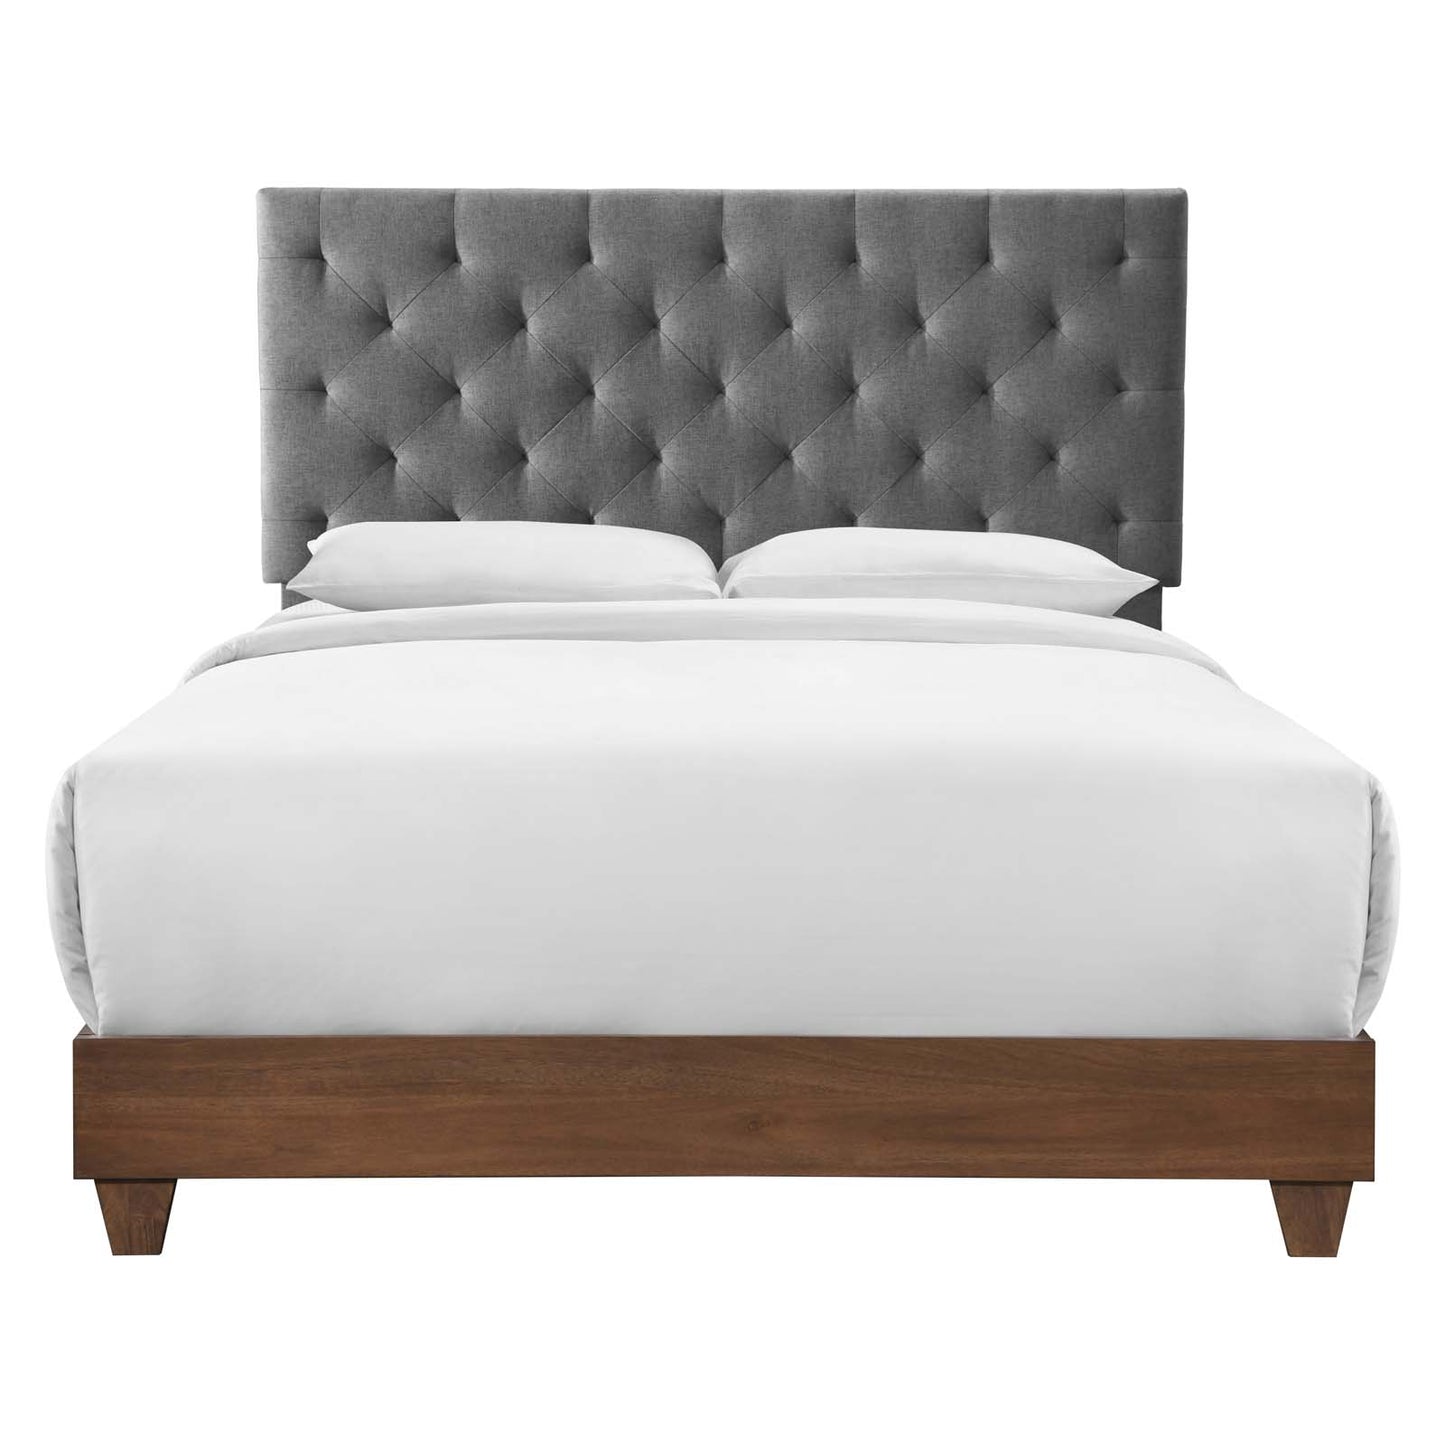 Rhiannon Diamond Tufted Upholstered Fabric Queen Bed Walnut Gray MOD-6146-WAL-GRY